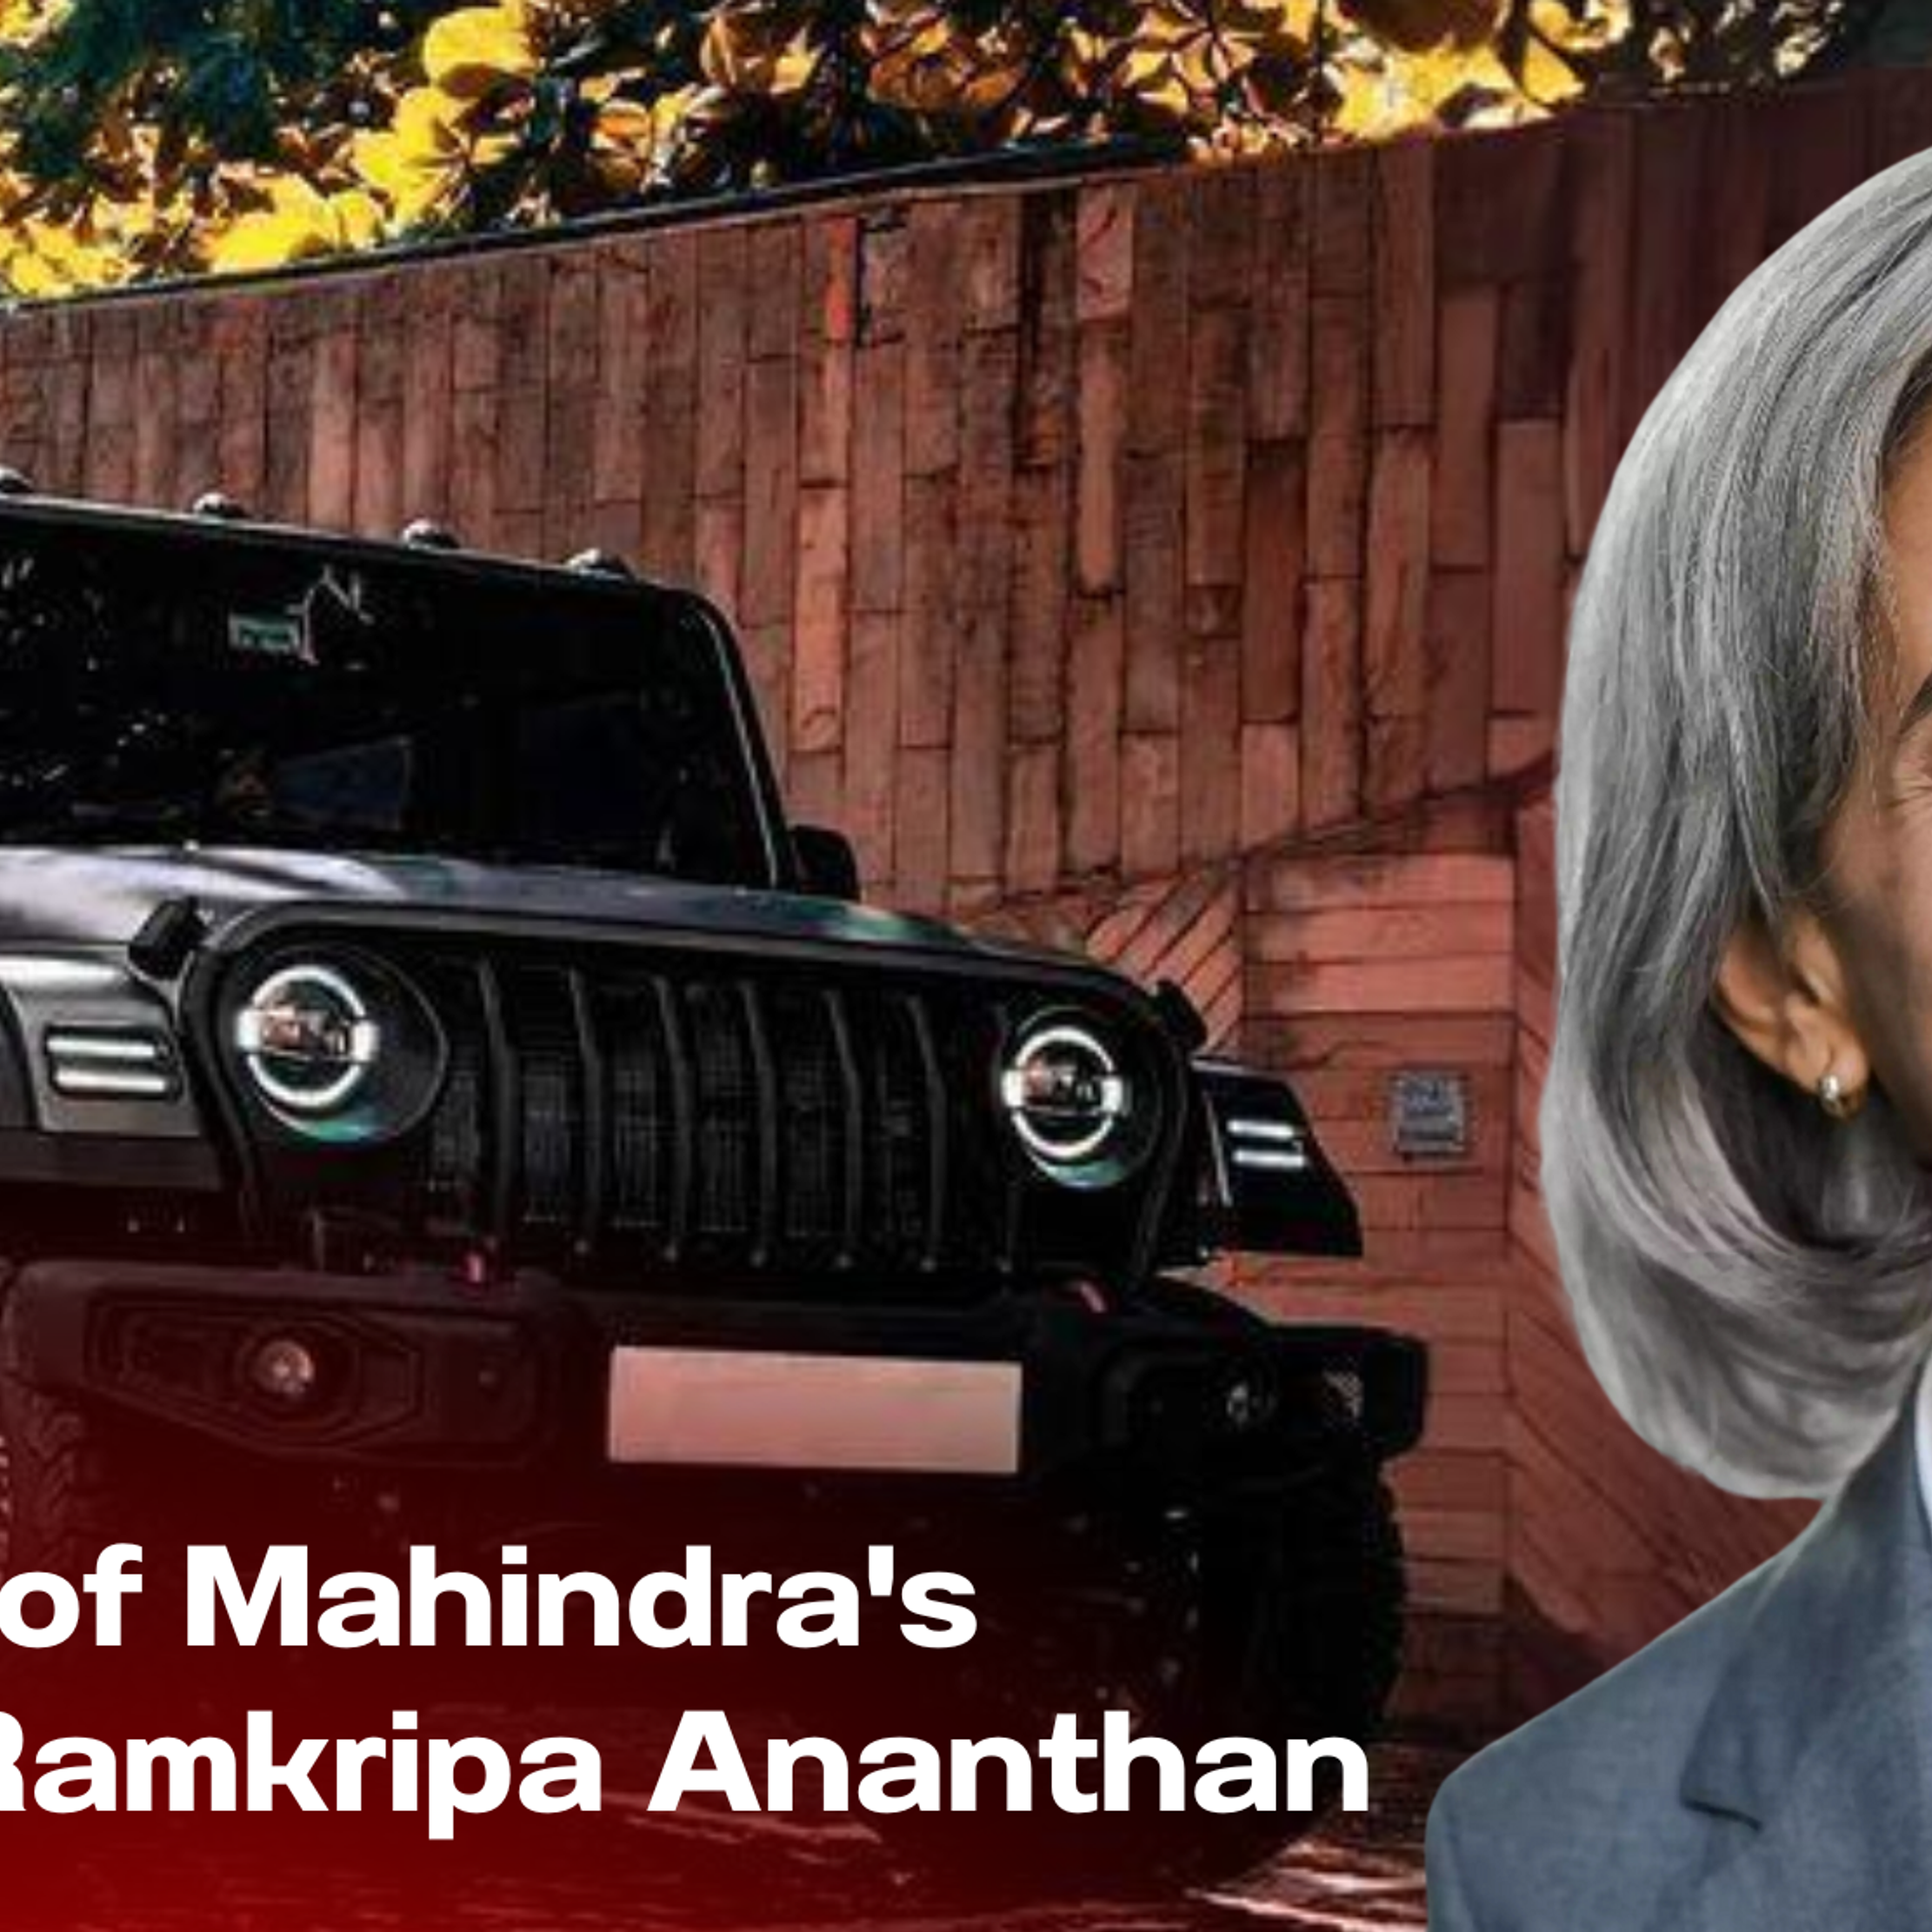 The Queen of Mahindra's Machines: Is Ramkripa Ananthan the Future of Indian Auto Design?